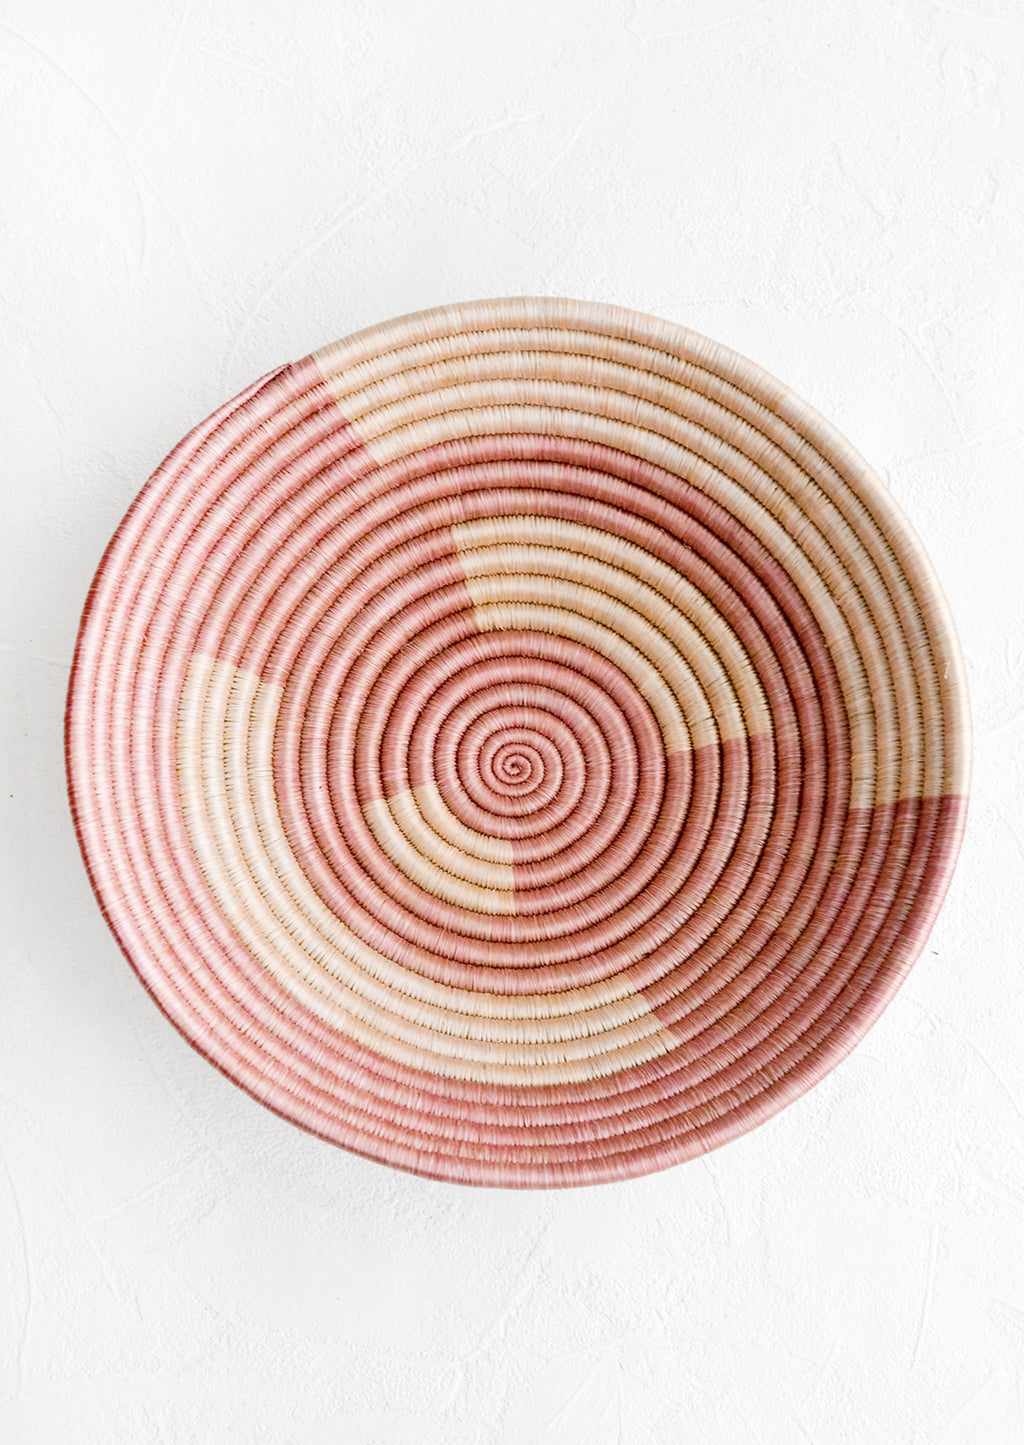 1: A woven sweetgrass bowl in geometric pink pattern.